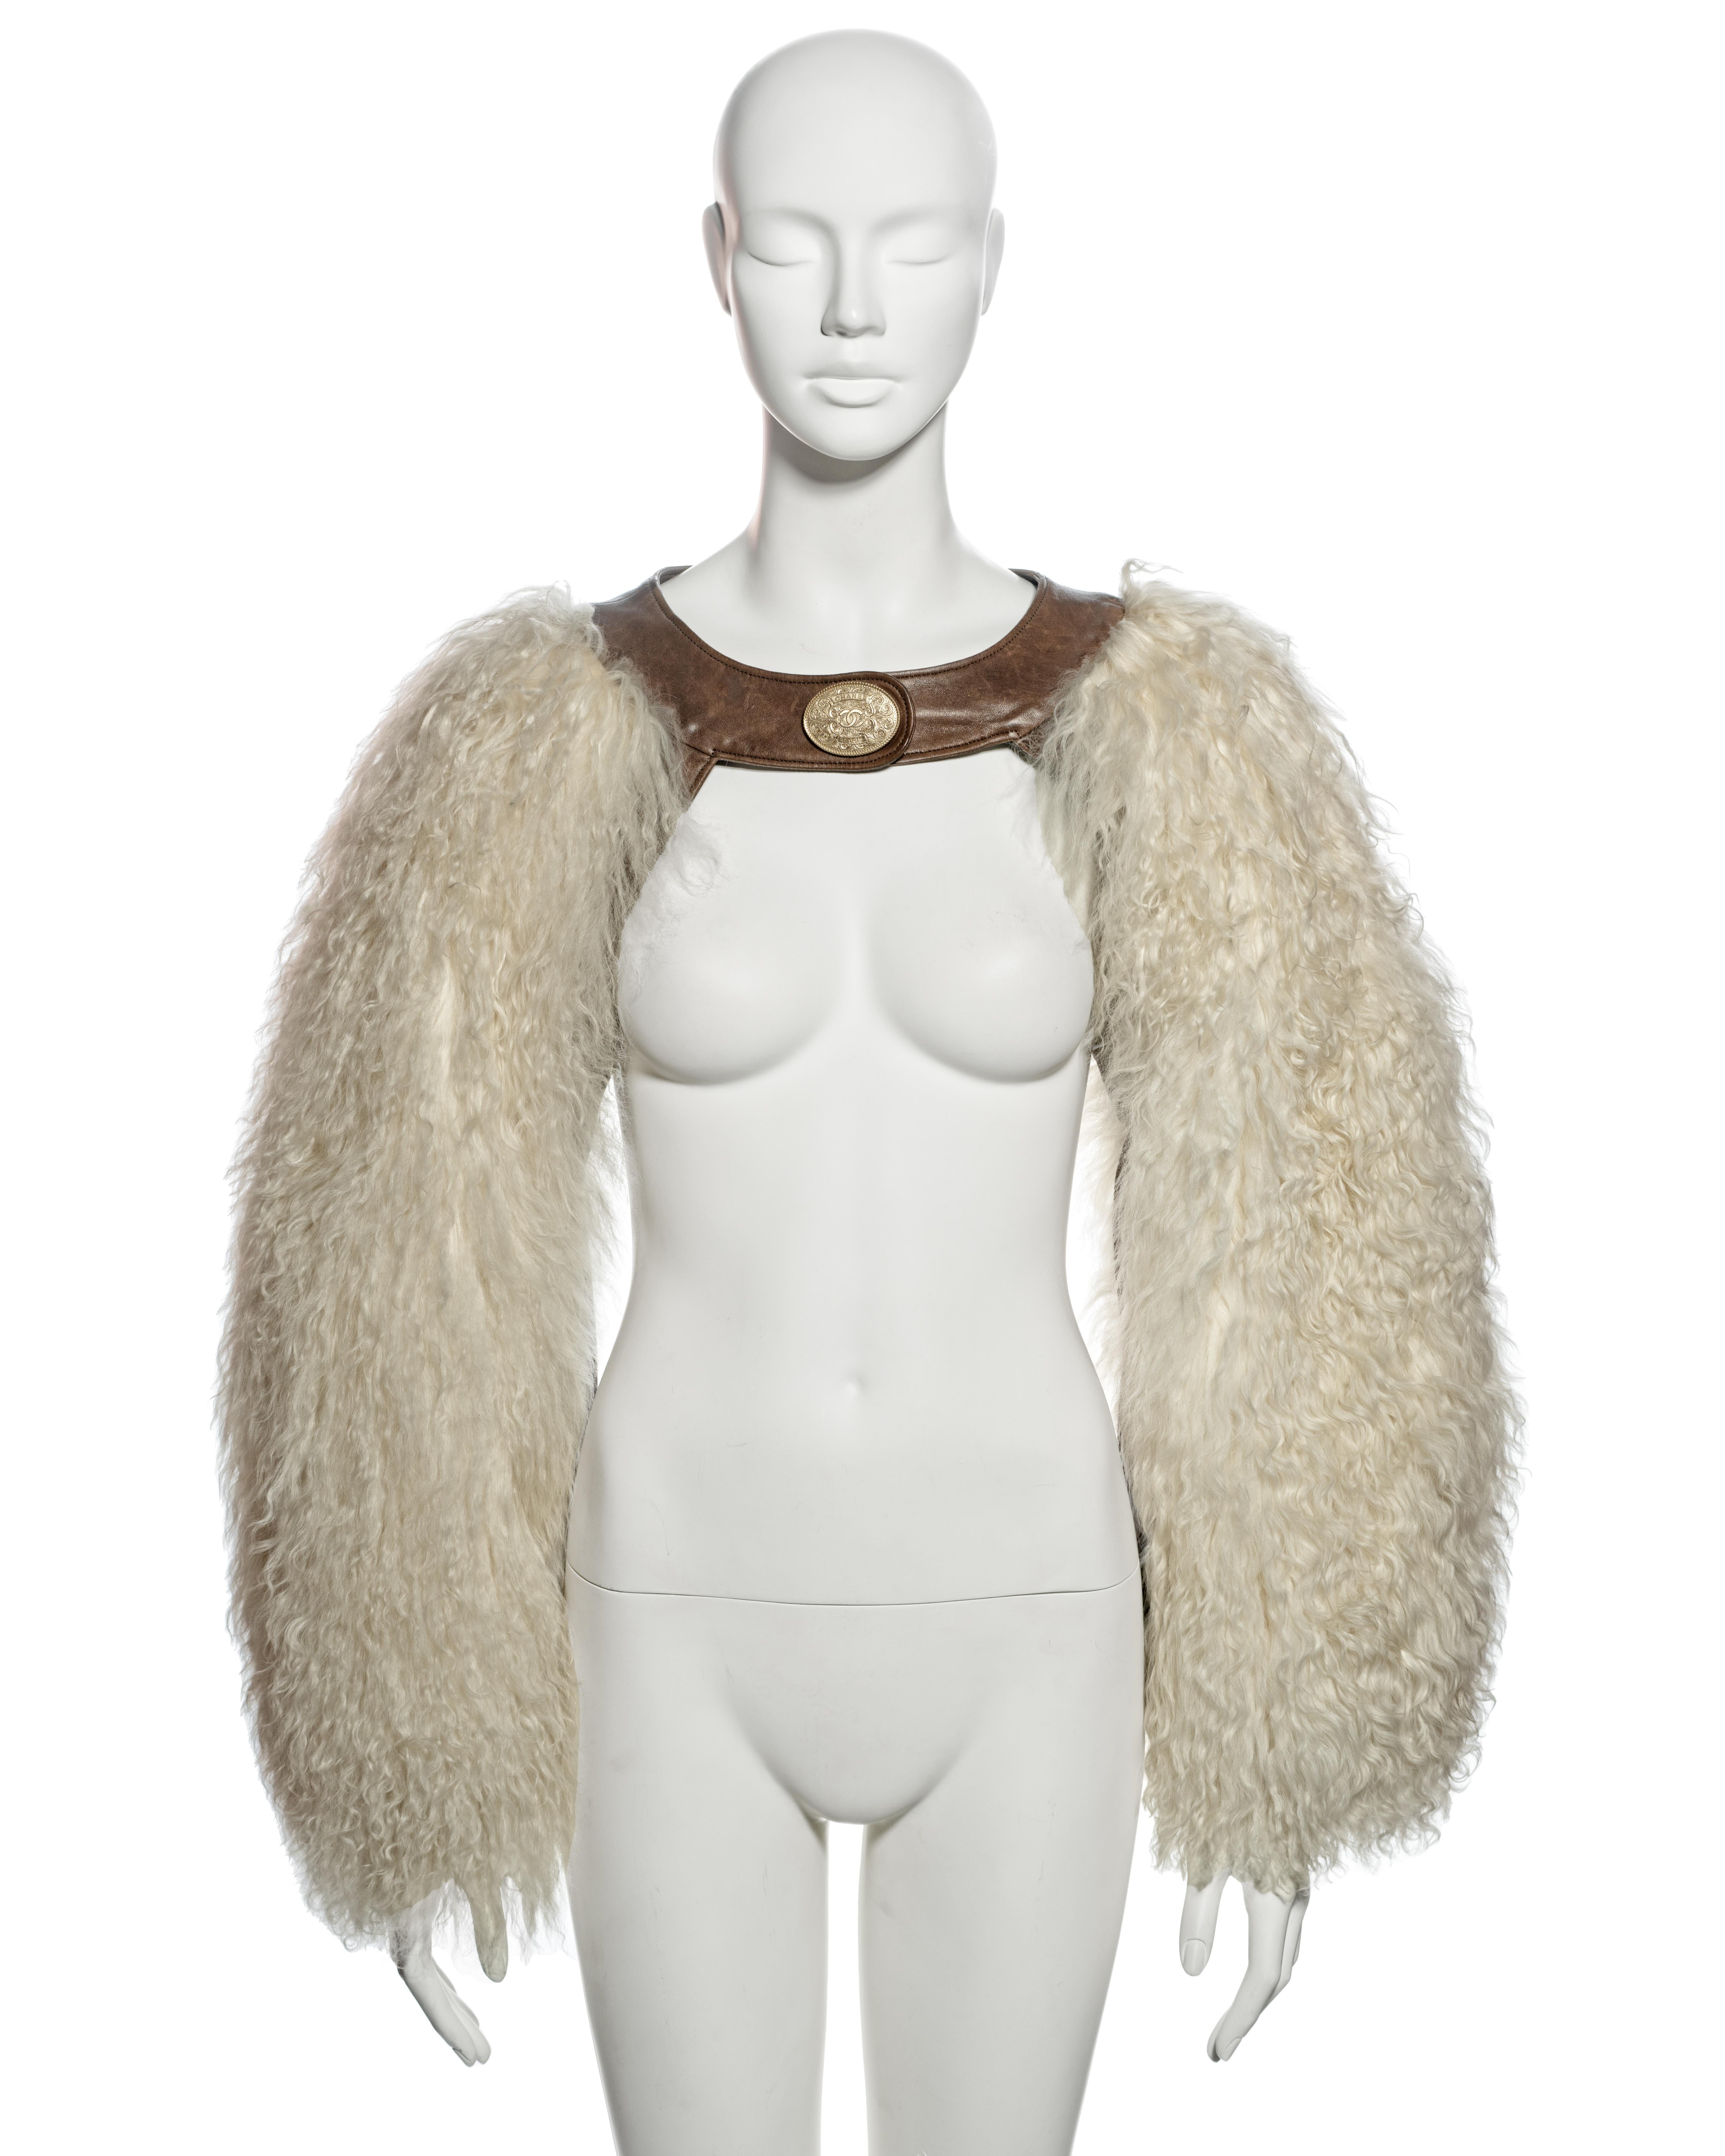 ▪ Archival Chanel Shearling Sleeves
▪ Creative Director: Karl Lagerfeld
▪ Métiers d'Art collection: Back in Dallas, pf 2014
▪ Sold by One of a Kind Archive
▪ Oversized White shearling sleeves 
▪ Connected with a brown lambskin leather collar 
▪